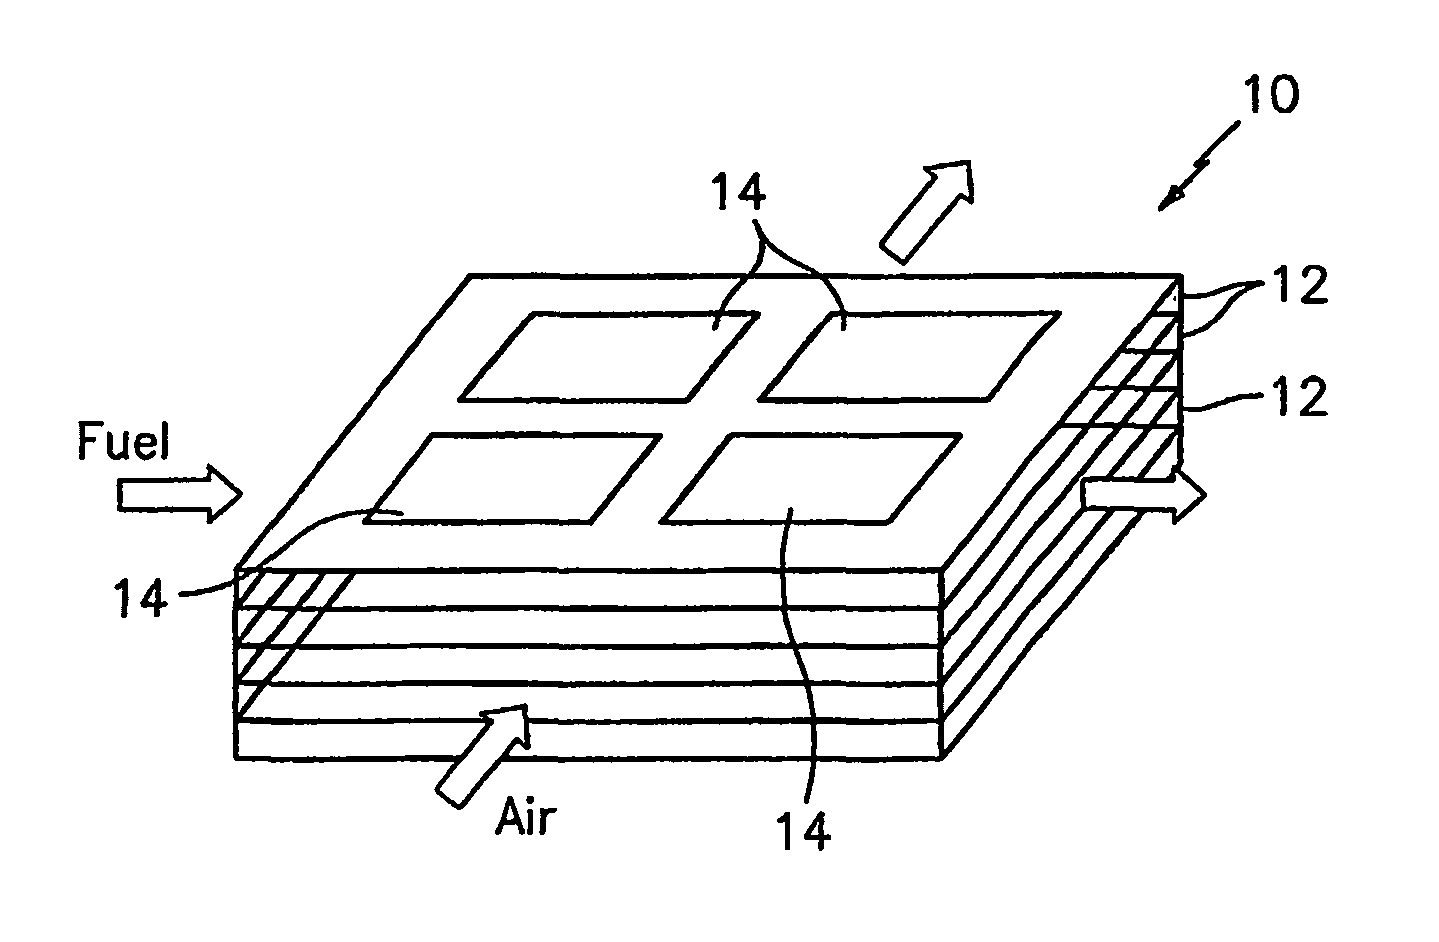 Compliant stack for a planar solid oxide fuel cell